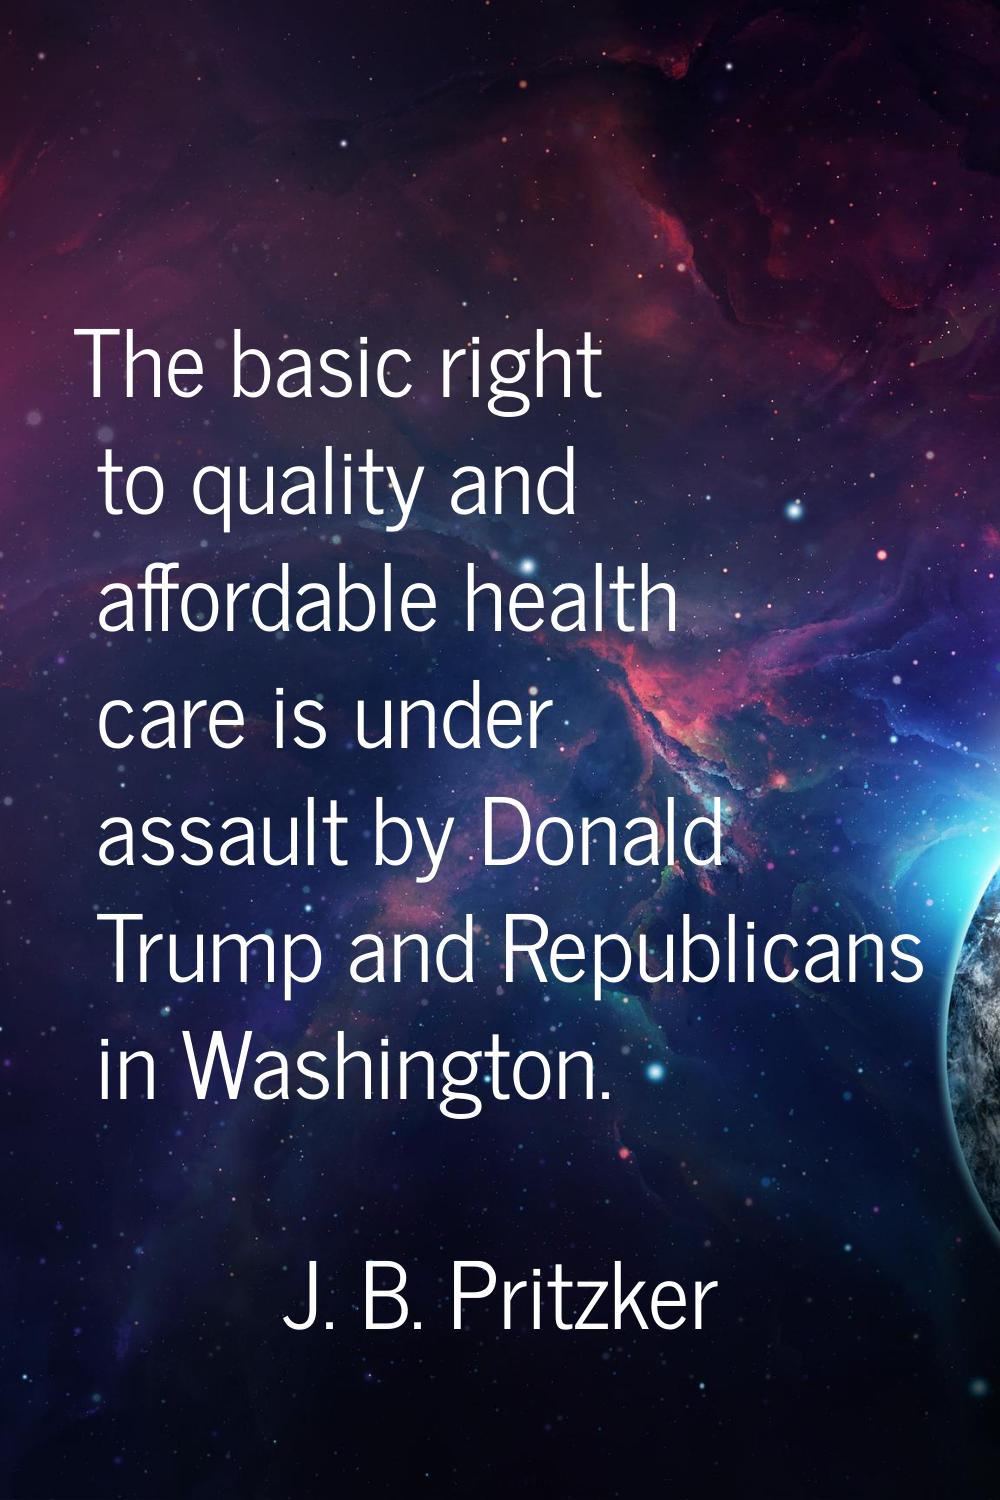 The basic right to quality and affordable health care is under assault by Donald Trump and Republic